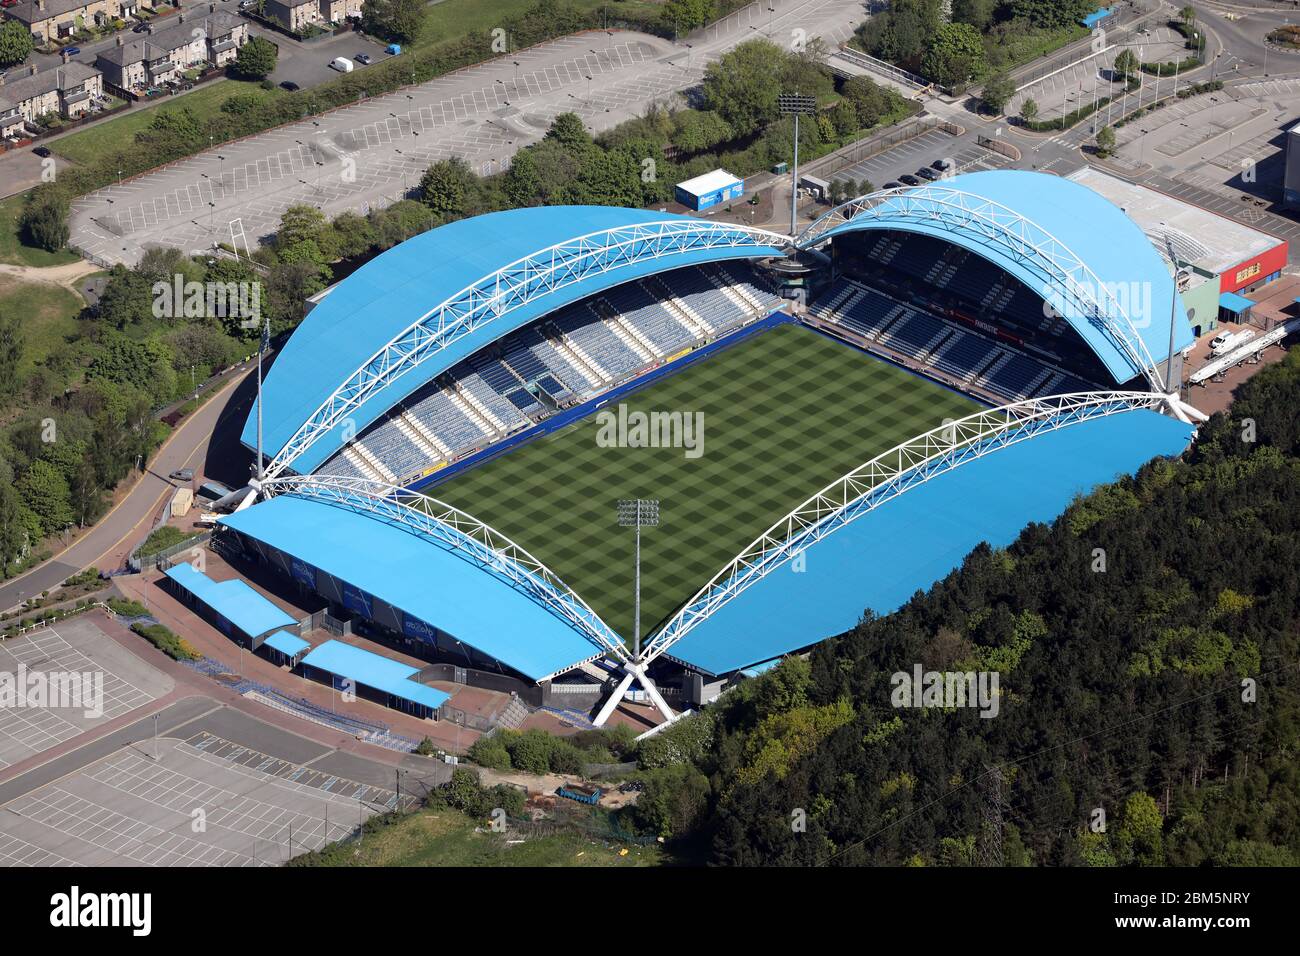 aerial view of The John Smith's Stadium, home of Huddersfield Town Football Club & rugby league side Huddersfield Giants Stock Photo